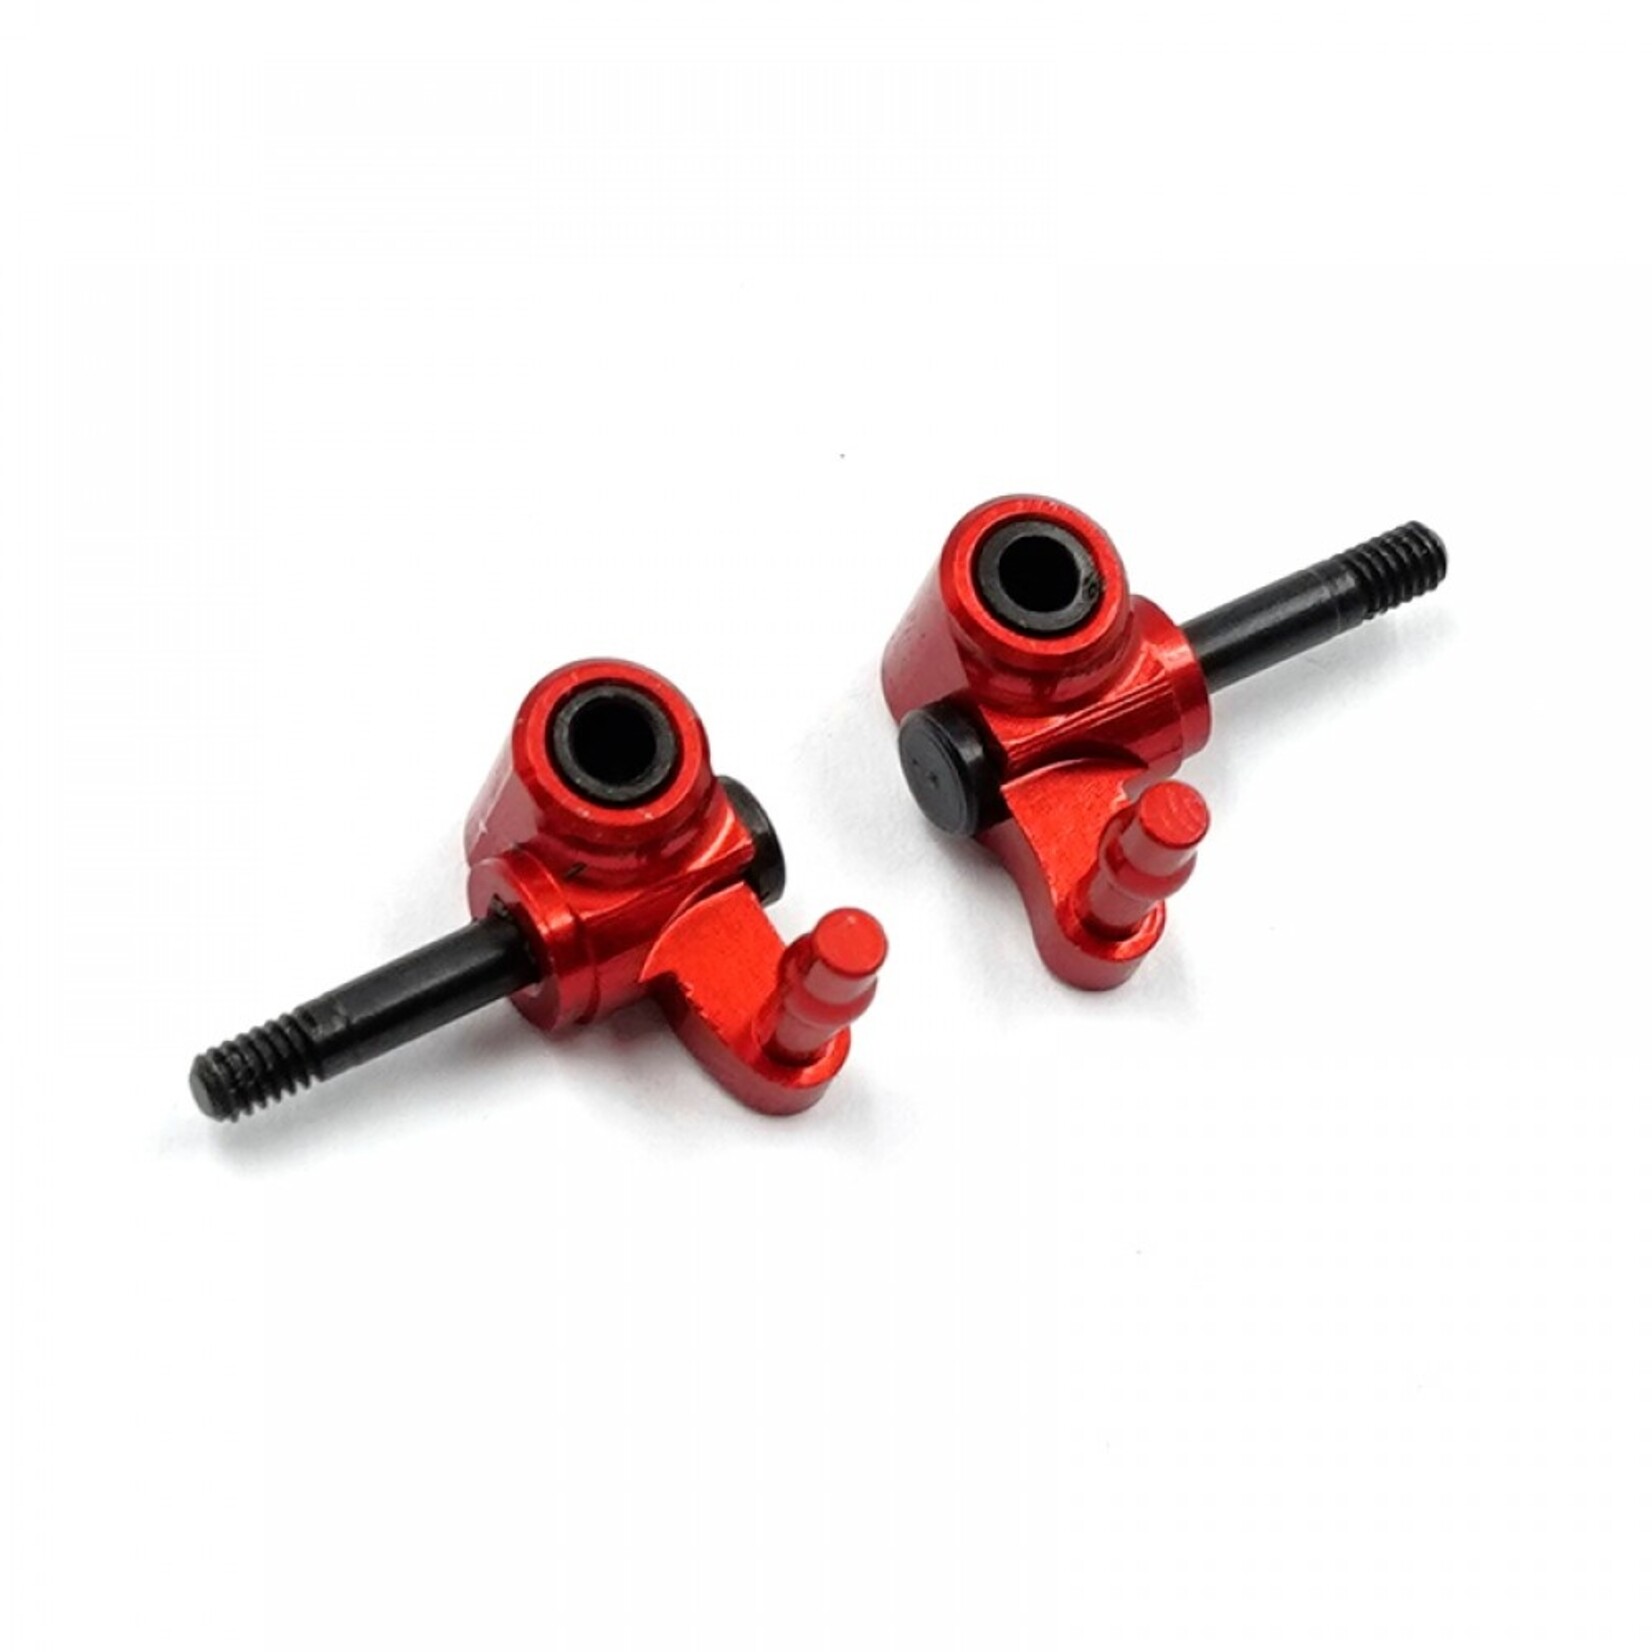 Route 246 Kyosho Route 246 Mini-Z Steering Block for MR03 (Camber 1) (Red) #R246-1311RB